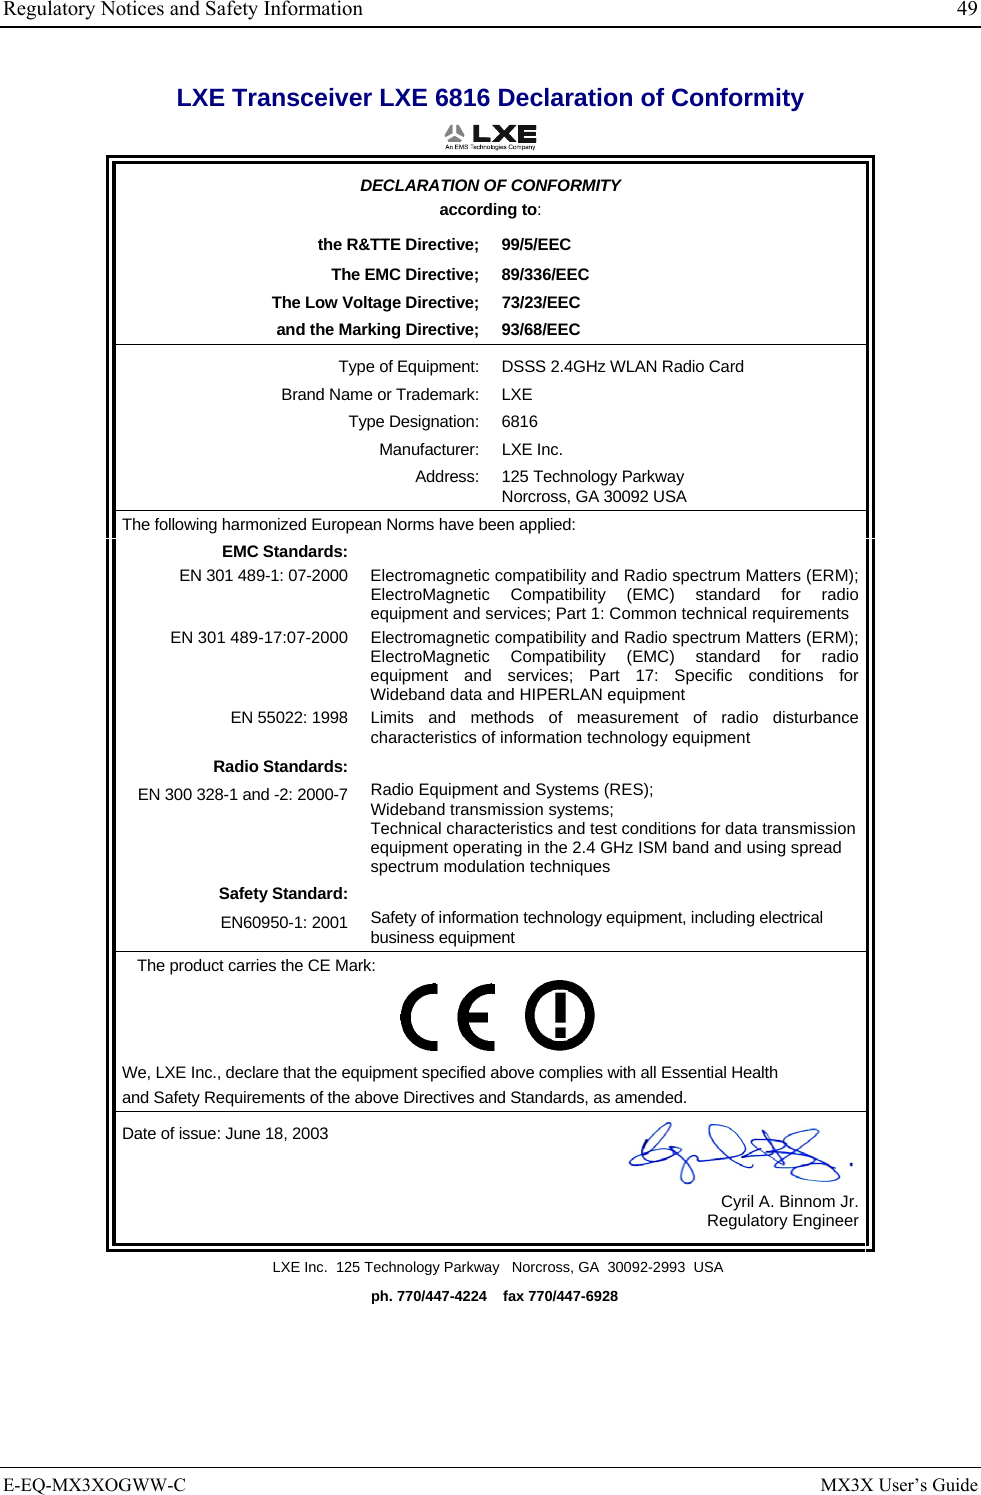 Regulatory Notices and Safety Information  49 LXE Transceiver LXE 6816 Declaration of Conformity  DECLARATION OF CONFORMITY according to: the R&amp;TTE Directive;  99/5/EEC The EMC Directive;  89/336/EEC The Low Voltage Directive;  73/23/EEC and the Marking Directive;  93/68/EEC Type of Equipment:  DSSS 2.4GHz WLAN Radio Card Brand Name or Trademark:  LXE Type Designation:  6816 Manufacturer: LXE Inc. Address: 125 Technology Parkway Norcross, GA 30092 USA The following harmonized European Norms have been applied:   EMC Standards:  EN 301 489-1: 07-2000  Electromagnetic compatibility and Radio spectrum Matters (ERM); ElectroMagnetic Compatibility (EMC) standard for radio equipment and services; Part 1: Common technical requirements EN 301 489-17:07-2000  Electromagnetic compatibility and Radio spectrum Matters (ERM); ElectroMagnetic Compatibility (EMC) standard for radio equipment and services; Part 17: Specific conditions for Wideband data and HIPERLAN equipment EN 55022: 1998 Limits and methods of measurement of radio disturbance characteristics of information technology equipment Radio Standards:  EN 300 328-1 and -2: 2000-7 Radio Equipment and Systems (RES); Wideband transmission systems; Technical characteristics and test conditions for data transmission equipment operating in the 2.4 GHz ISM band and using spread spectrum modulation techniques Safety Standard:  EN60950-1: 2001 Safety of information technology equipment, including electrical business equipment The product carries the CE Mark:         We, LXE Inc., declare that the equipment specified above complies with all Essential Health  and Safety Requirements of the above Directives and Standards, as amended. Date of issue: June 18, 2003  Cyril A. Binnom Jr. Regulatory Engineer LXE Inc.  125 Technology Parkway   Norcross, GA  30092-2993  USA   ph. 770/447-4224    fax 770/447-6928 E-EQ-MX3XOGWW-C  MX3X User’s Guide 